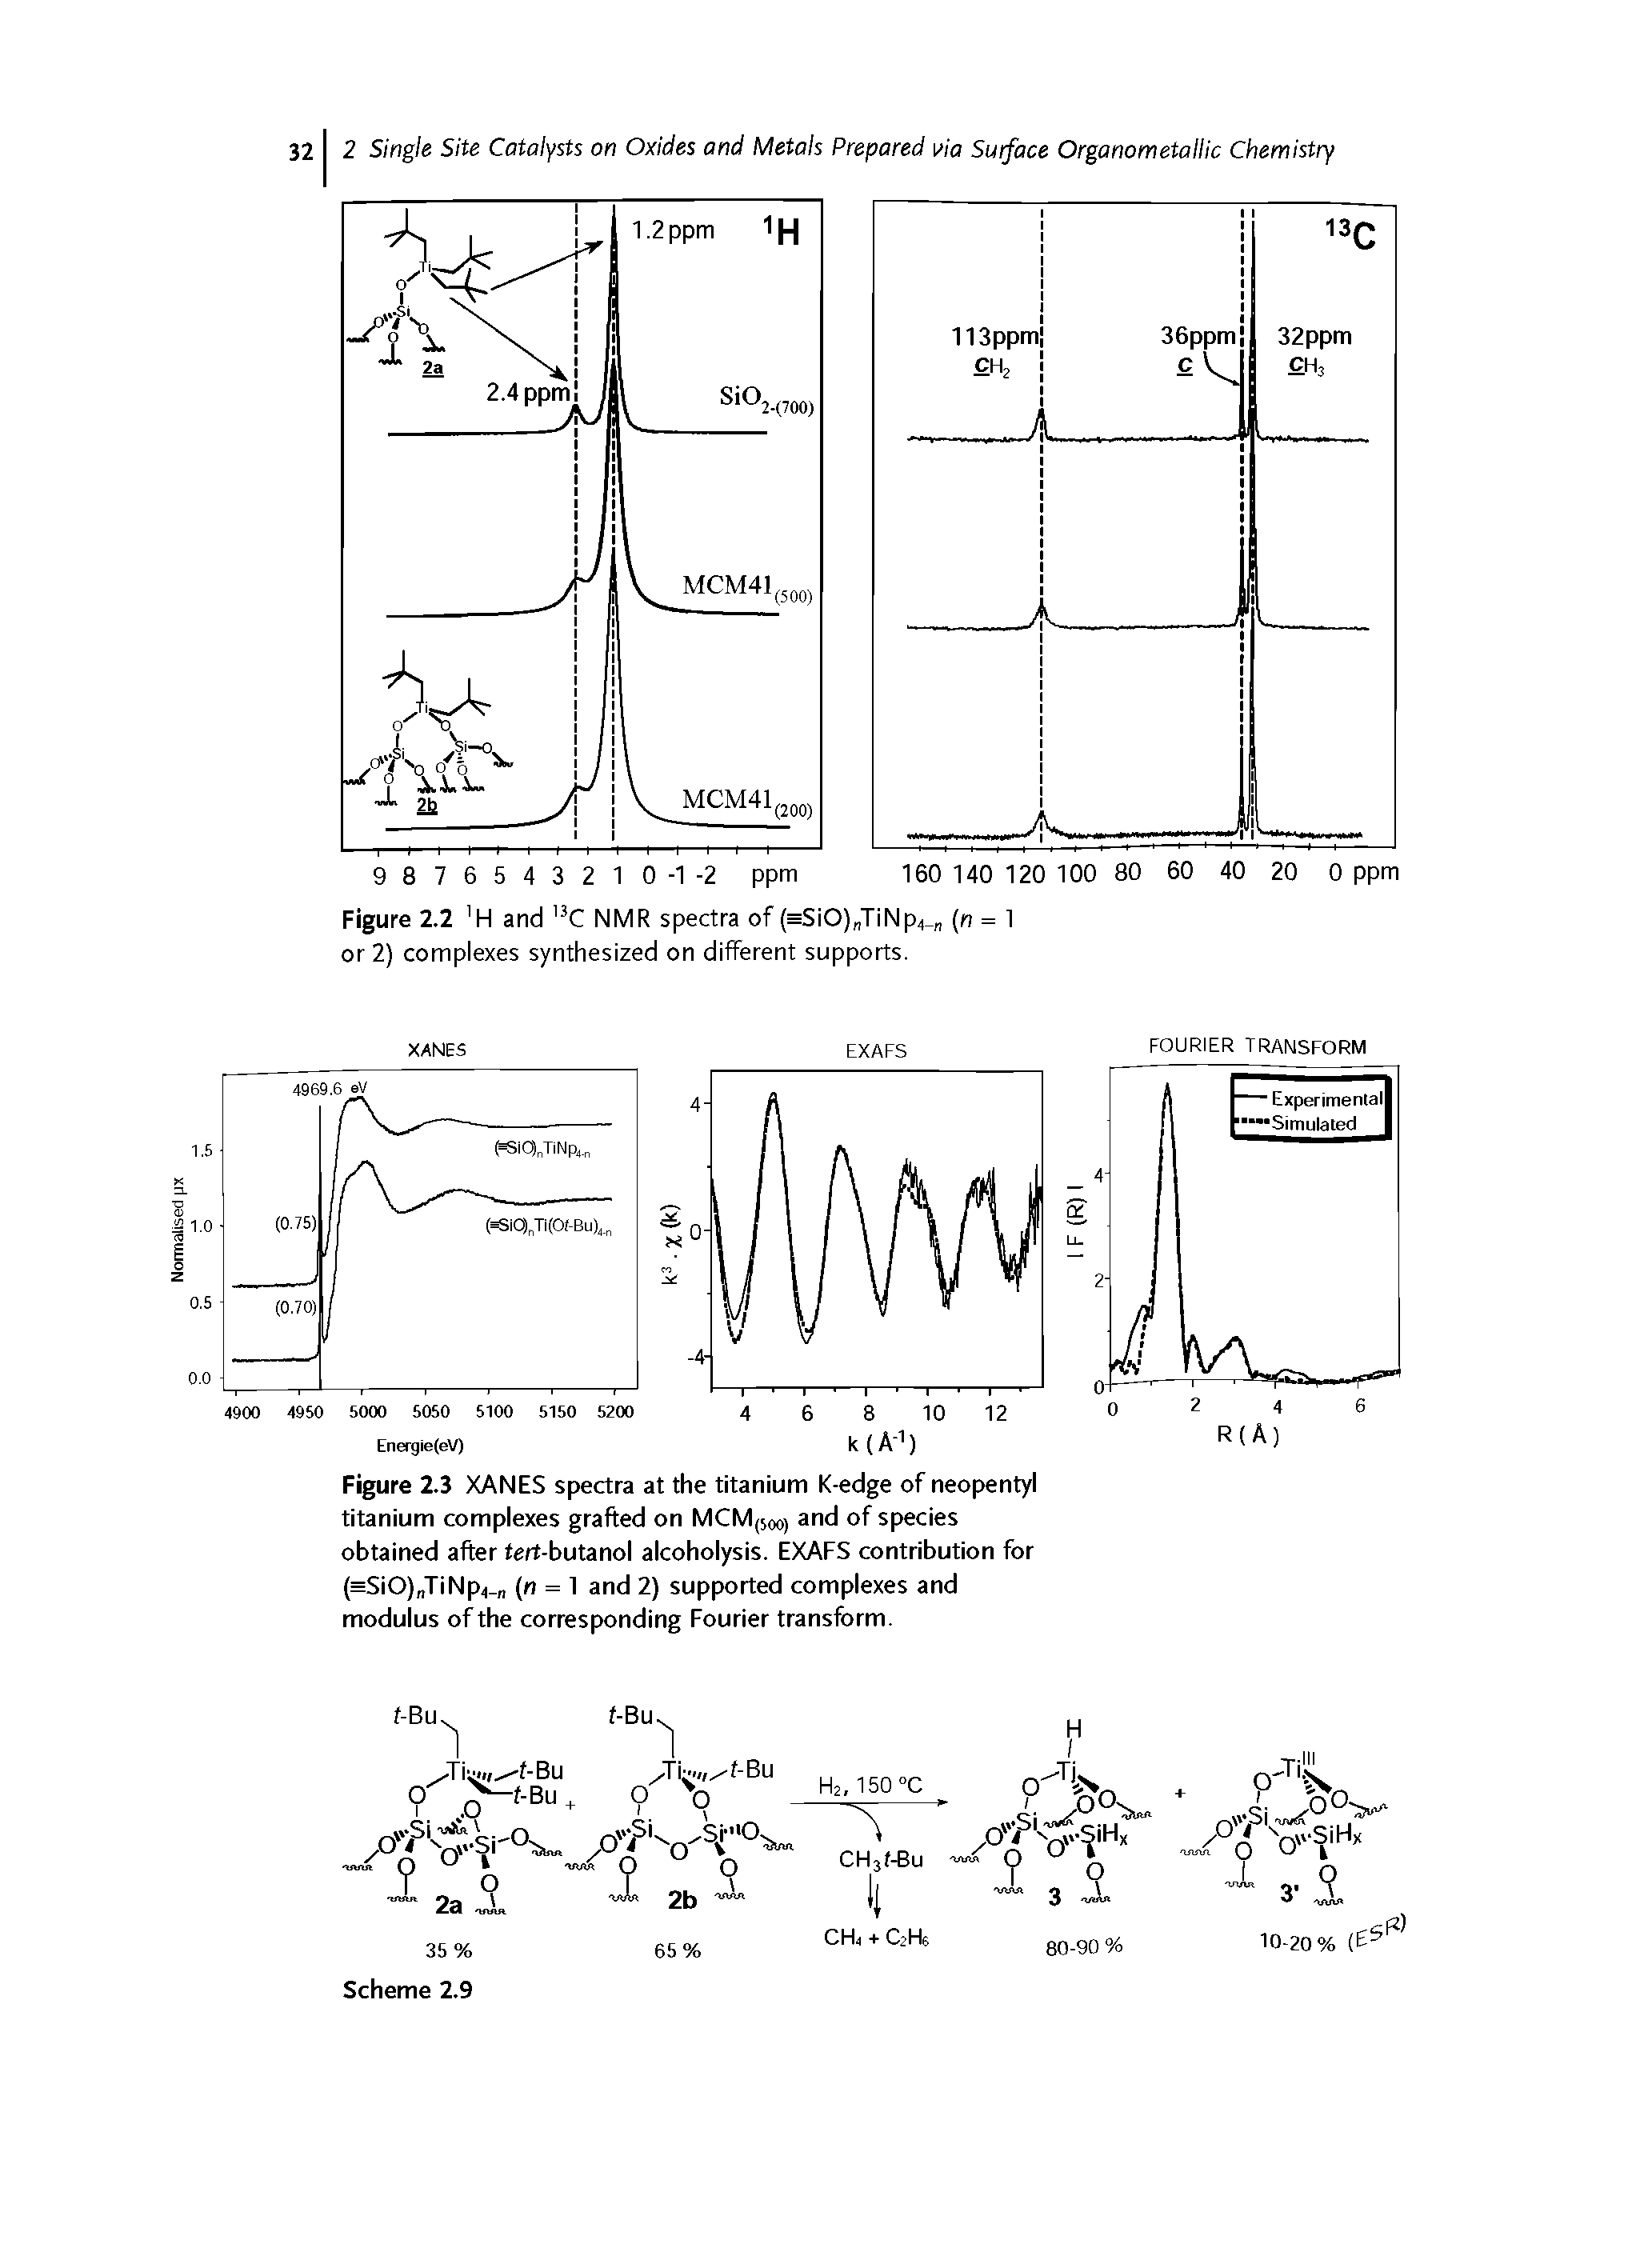 Figure 2.3 XANES spectra at the titanium K-edge of neopentyl titanium complexes grafted on MCM(5oo) and of species obtained after fert-butanol alcoholysis. EXAFS contribution for (=SiO) TiNpi (n = 1 and 2) supported complexes and modulus of the corresponding Fourier transform.